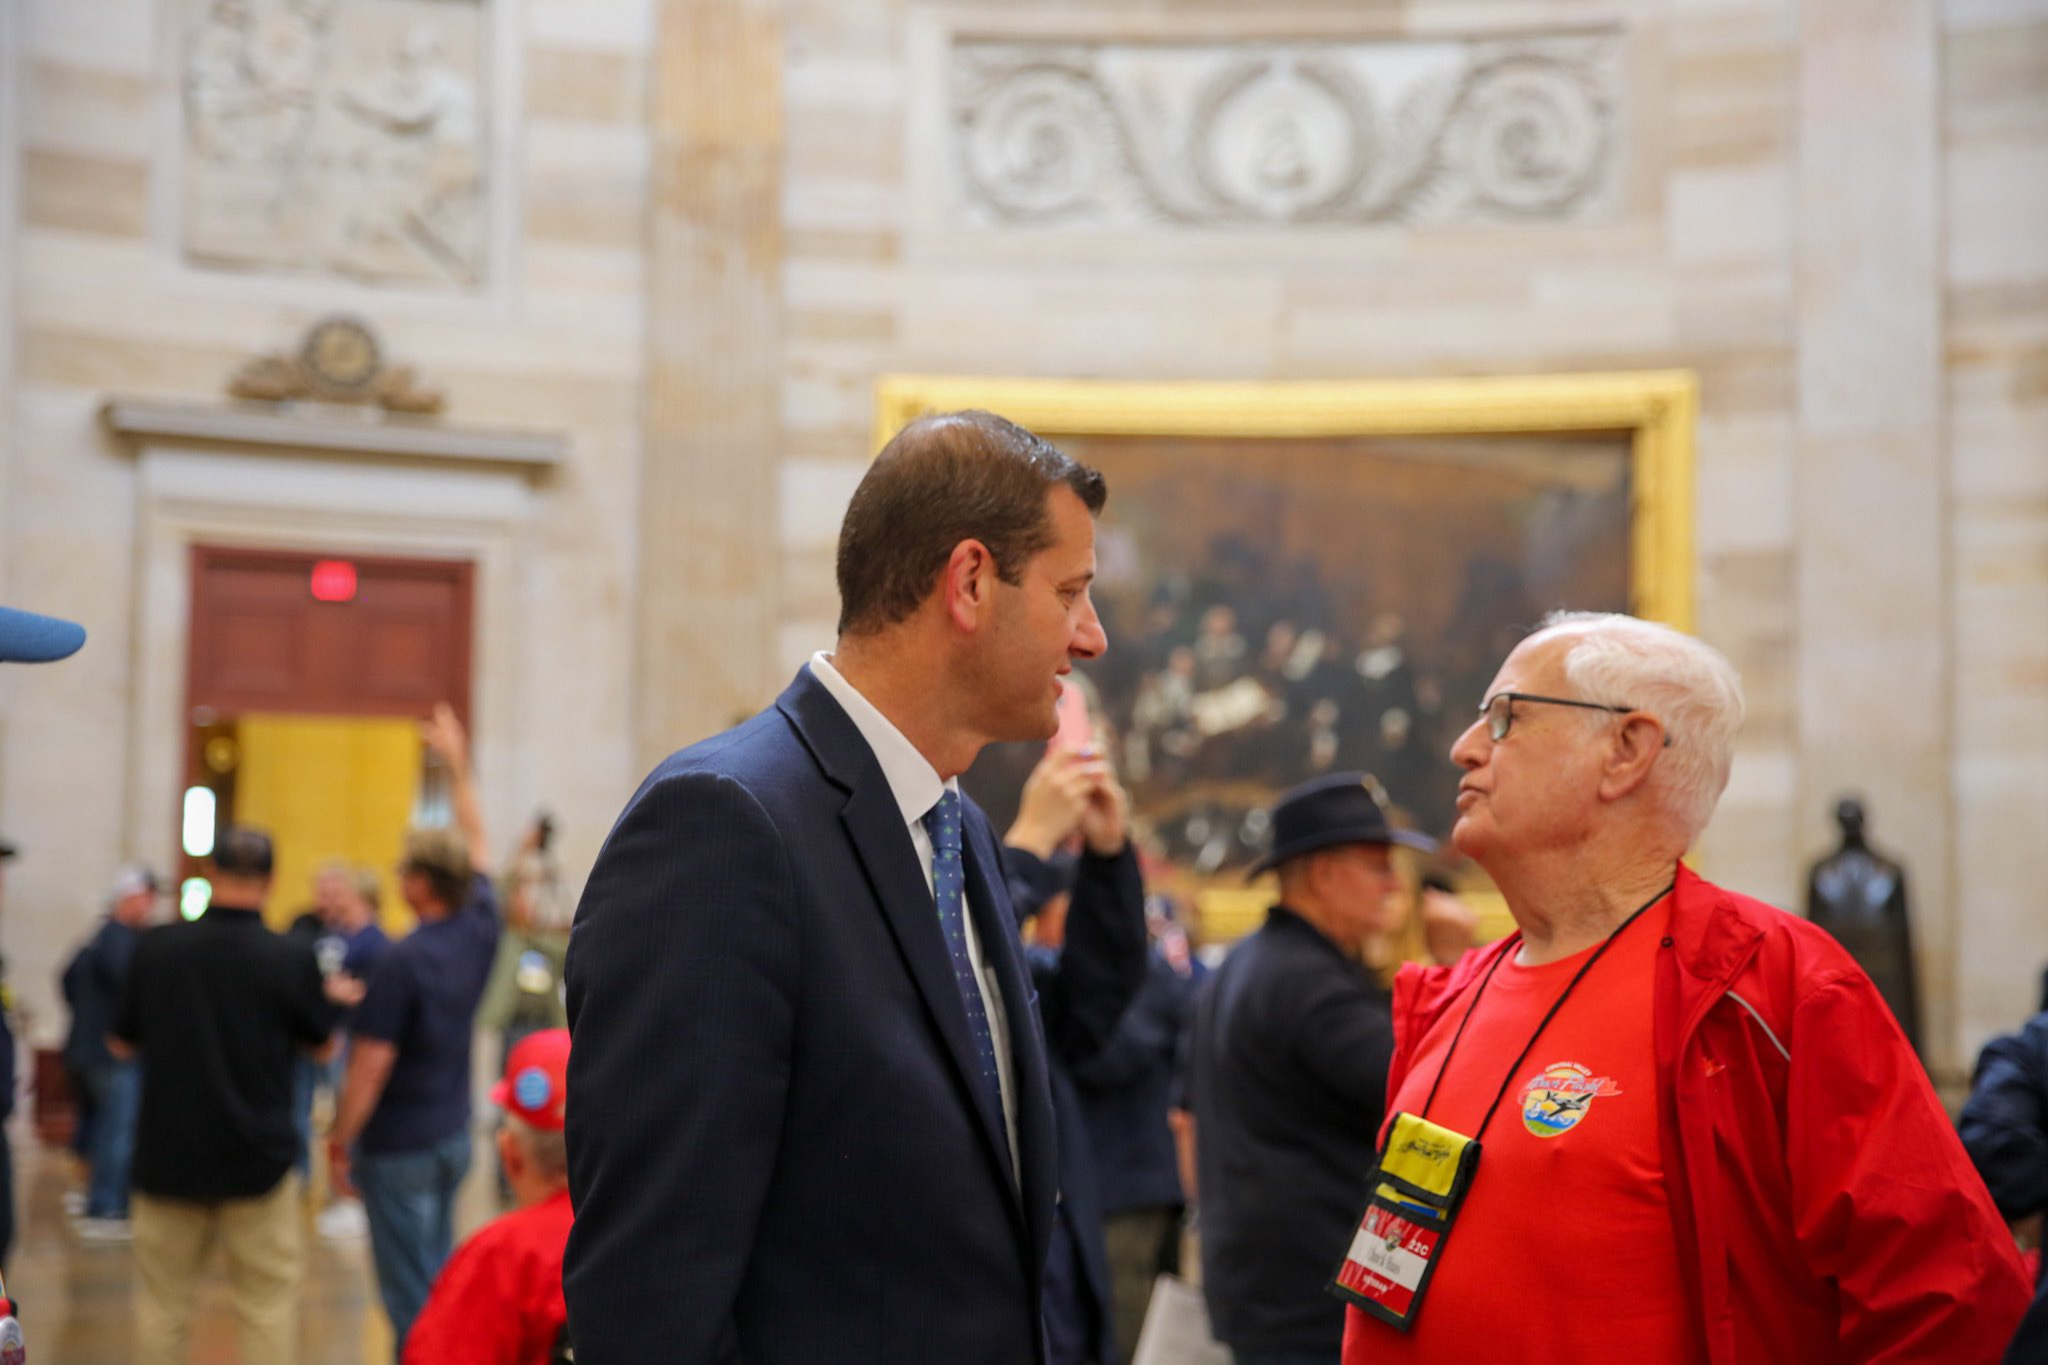 Rep. Valadao meets with Veterans in the Capitol Rotunda